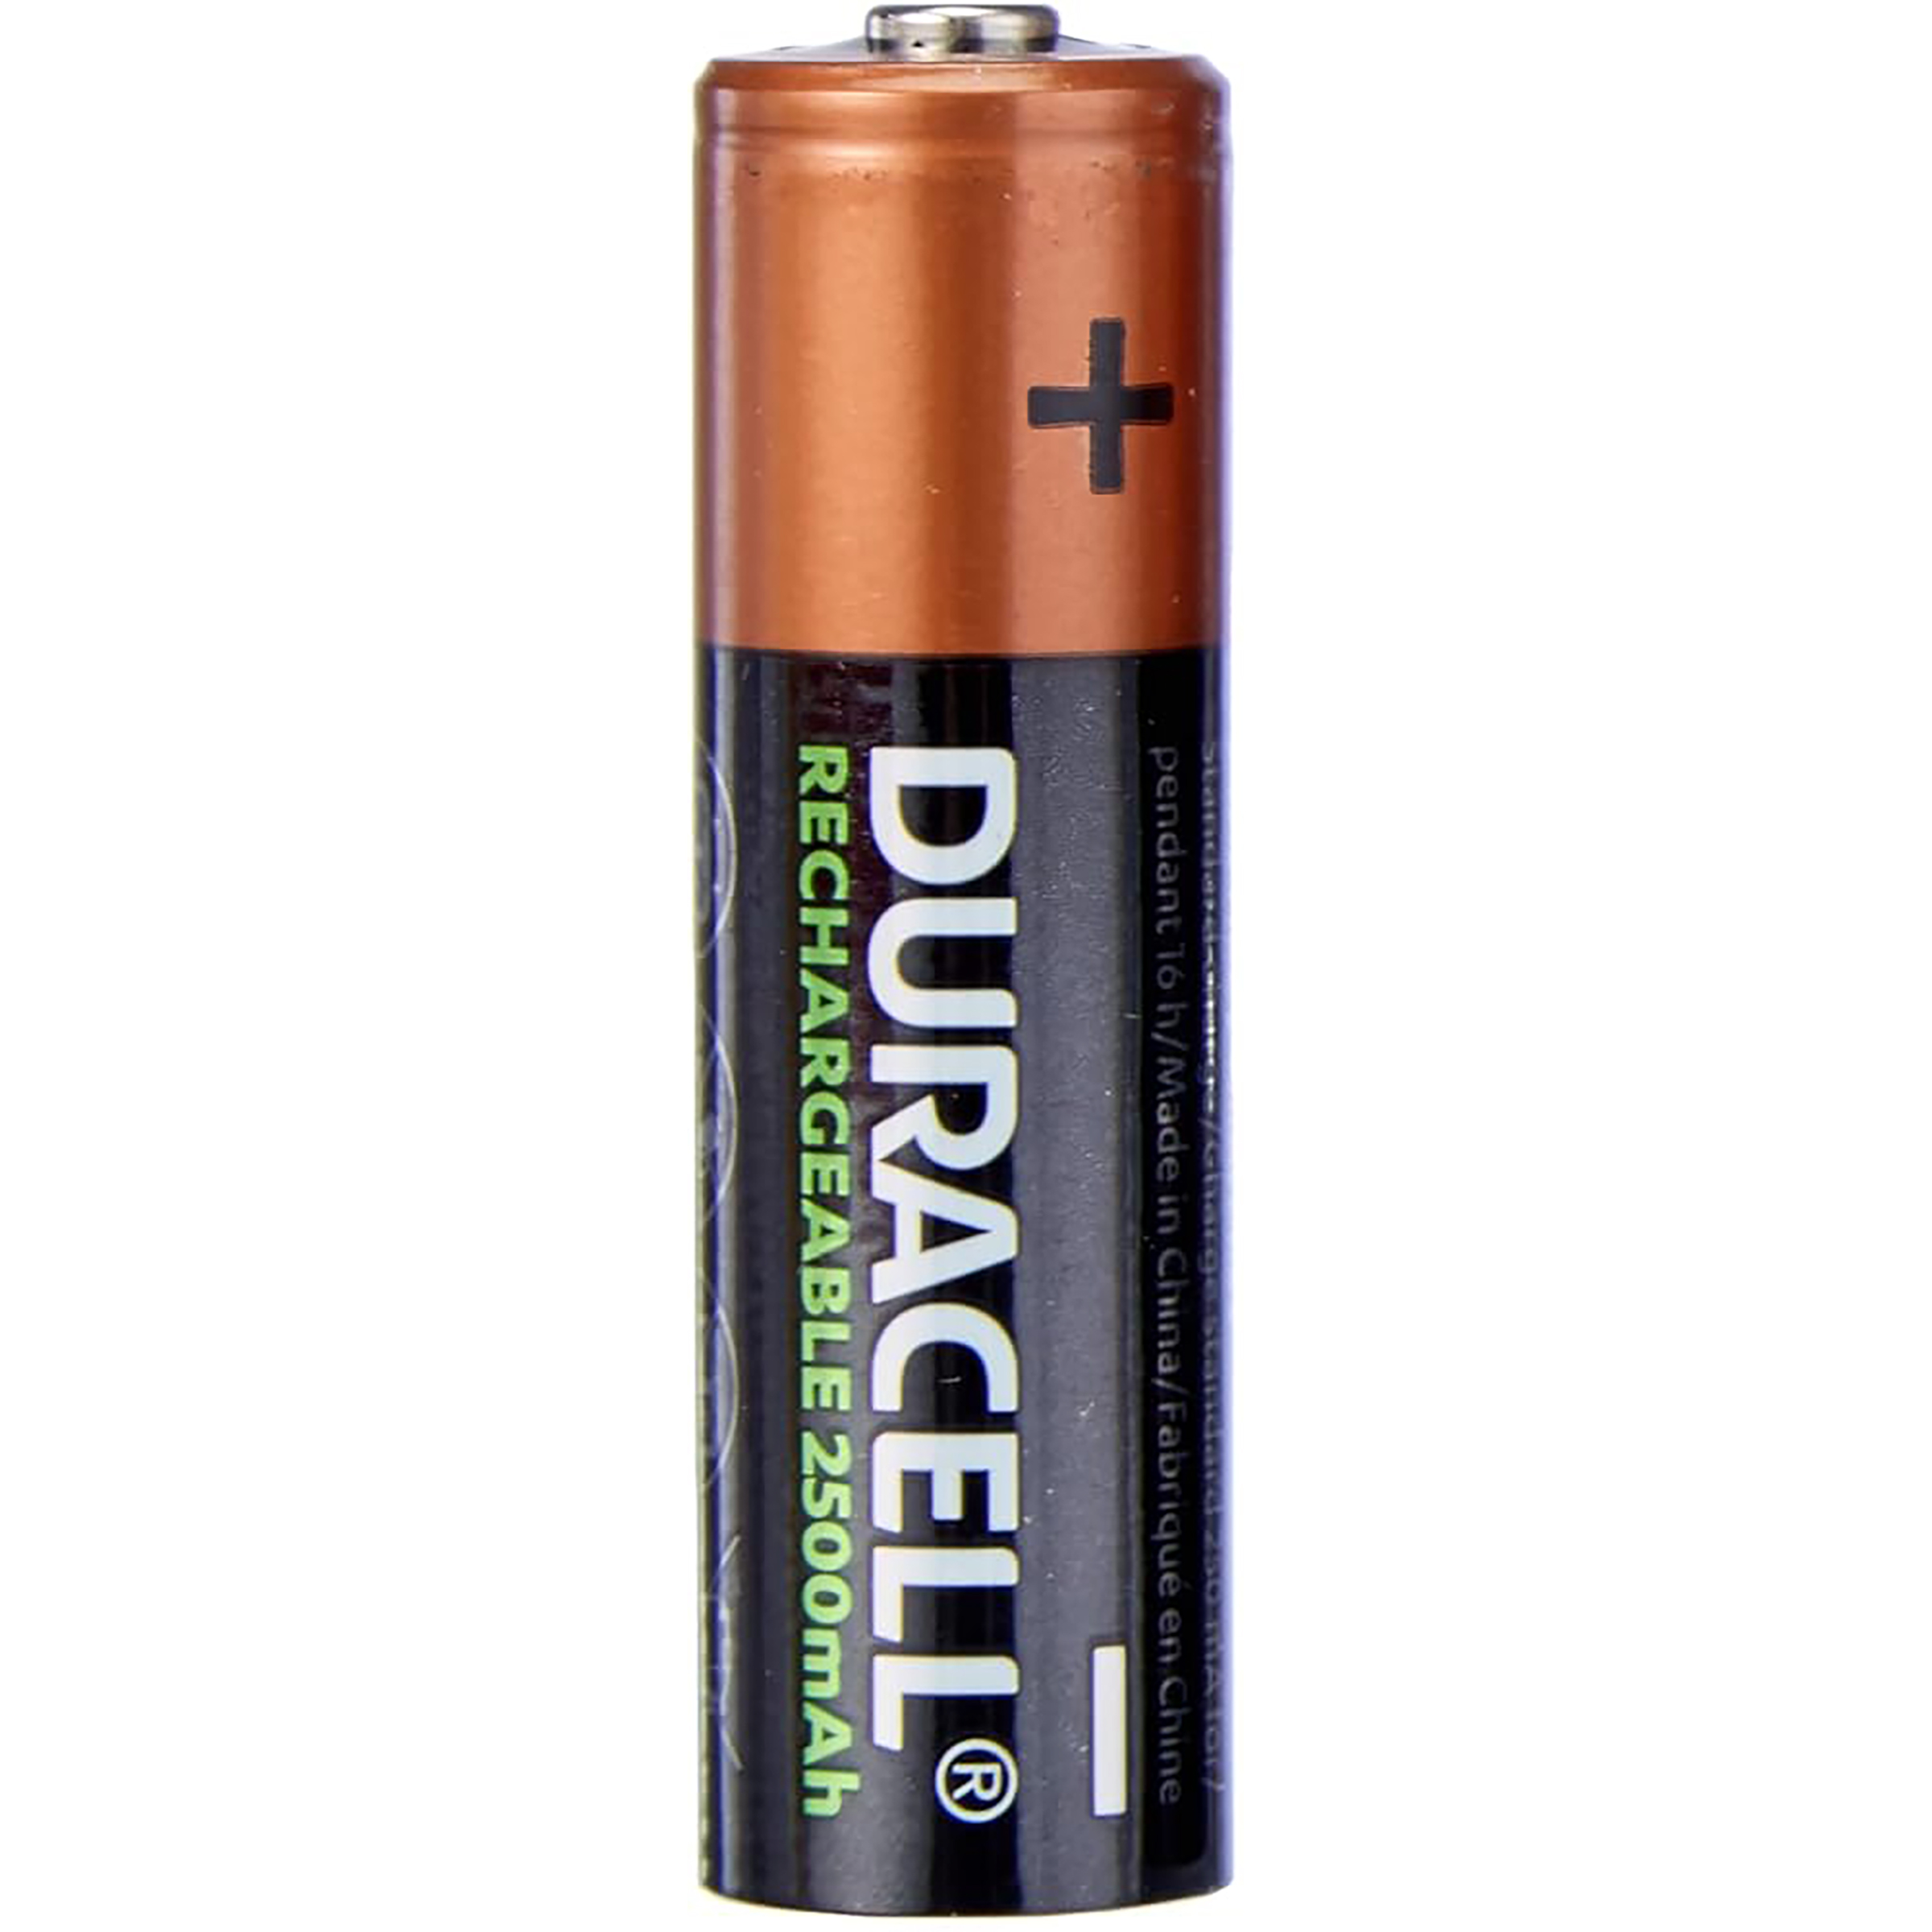 https://imtc.qccdn.fr/test/piles-rechargeables/zoom/duracell-rechargeable-aa_001.jpg